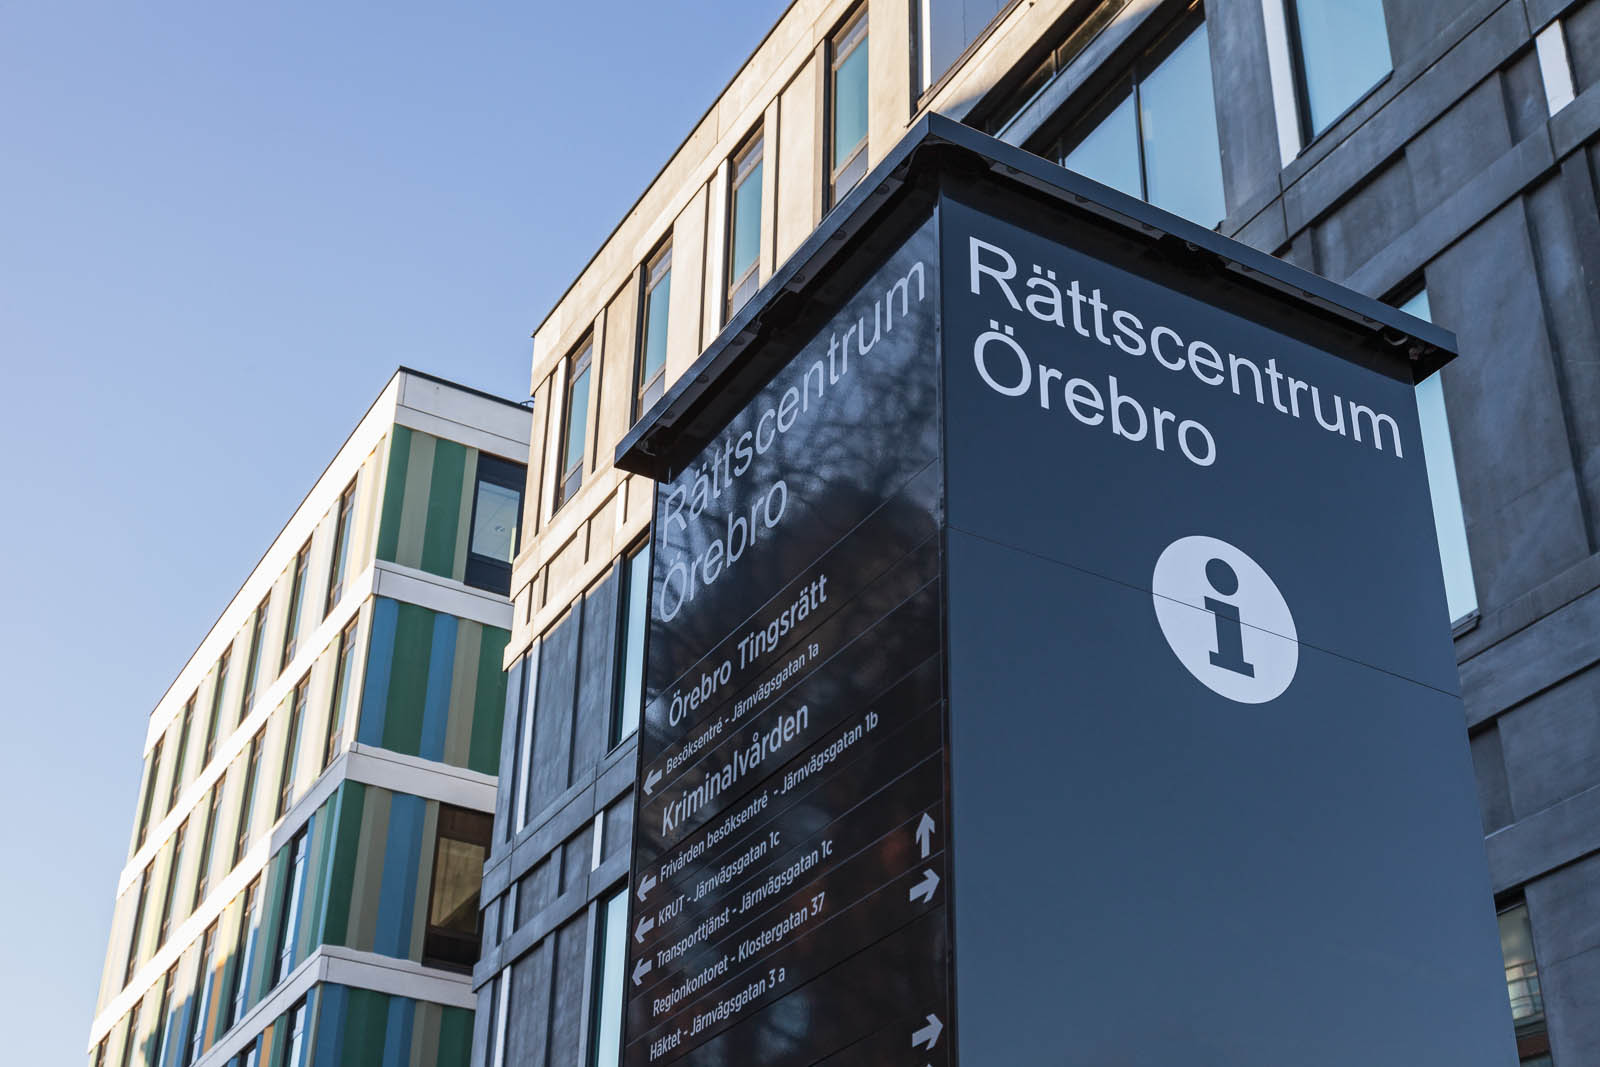 Information sign outside the district court in Örebro.